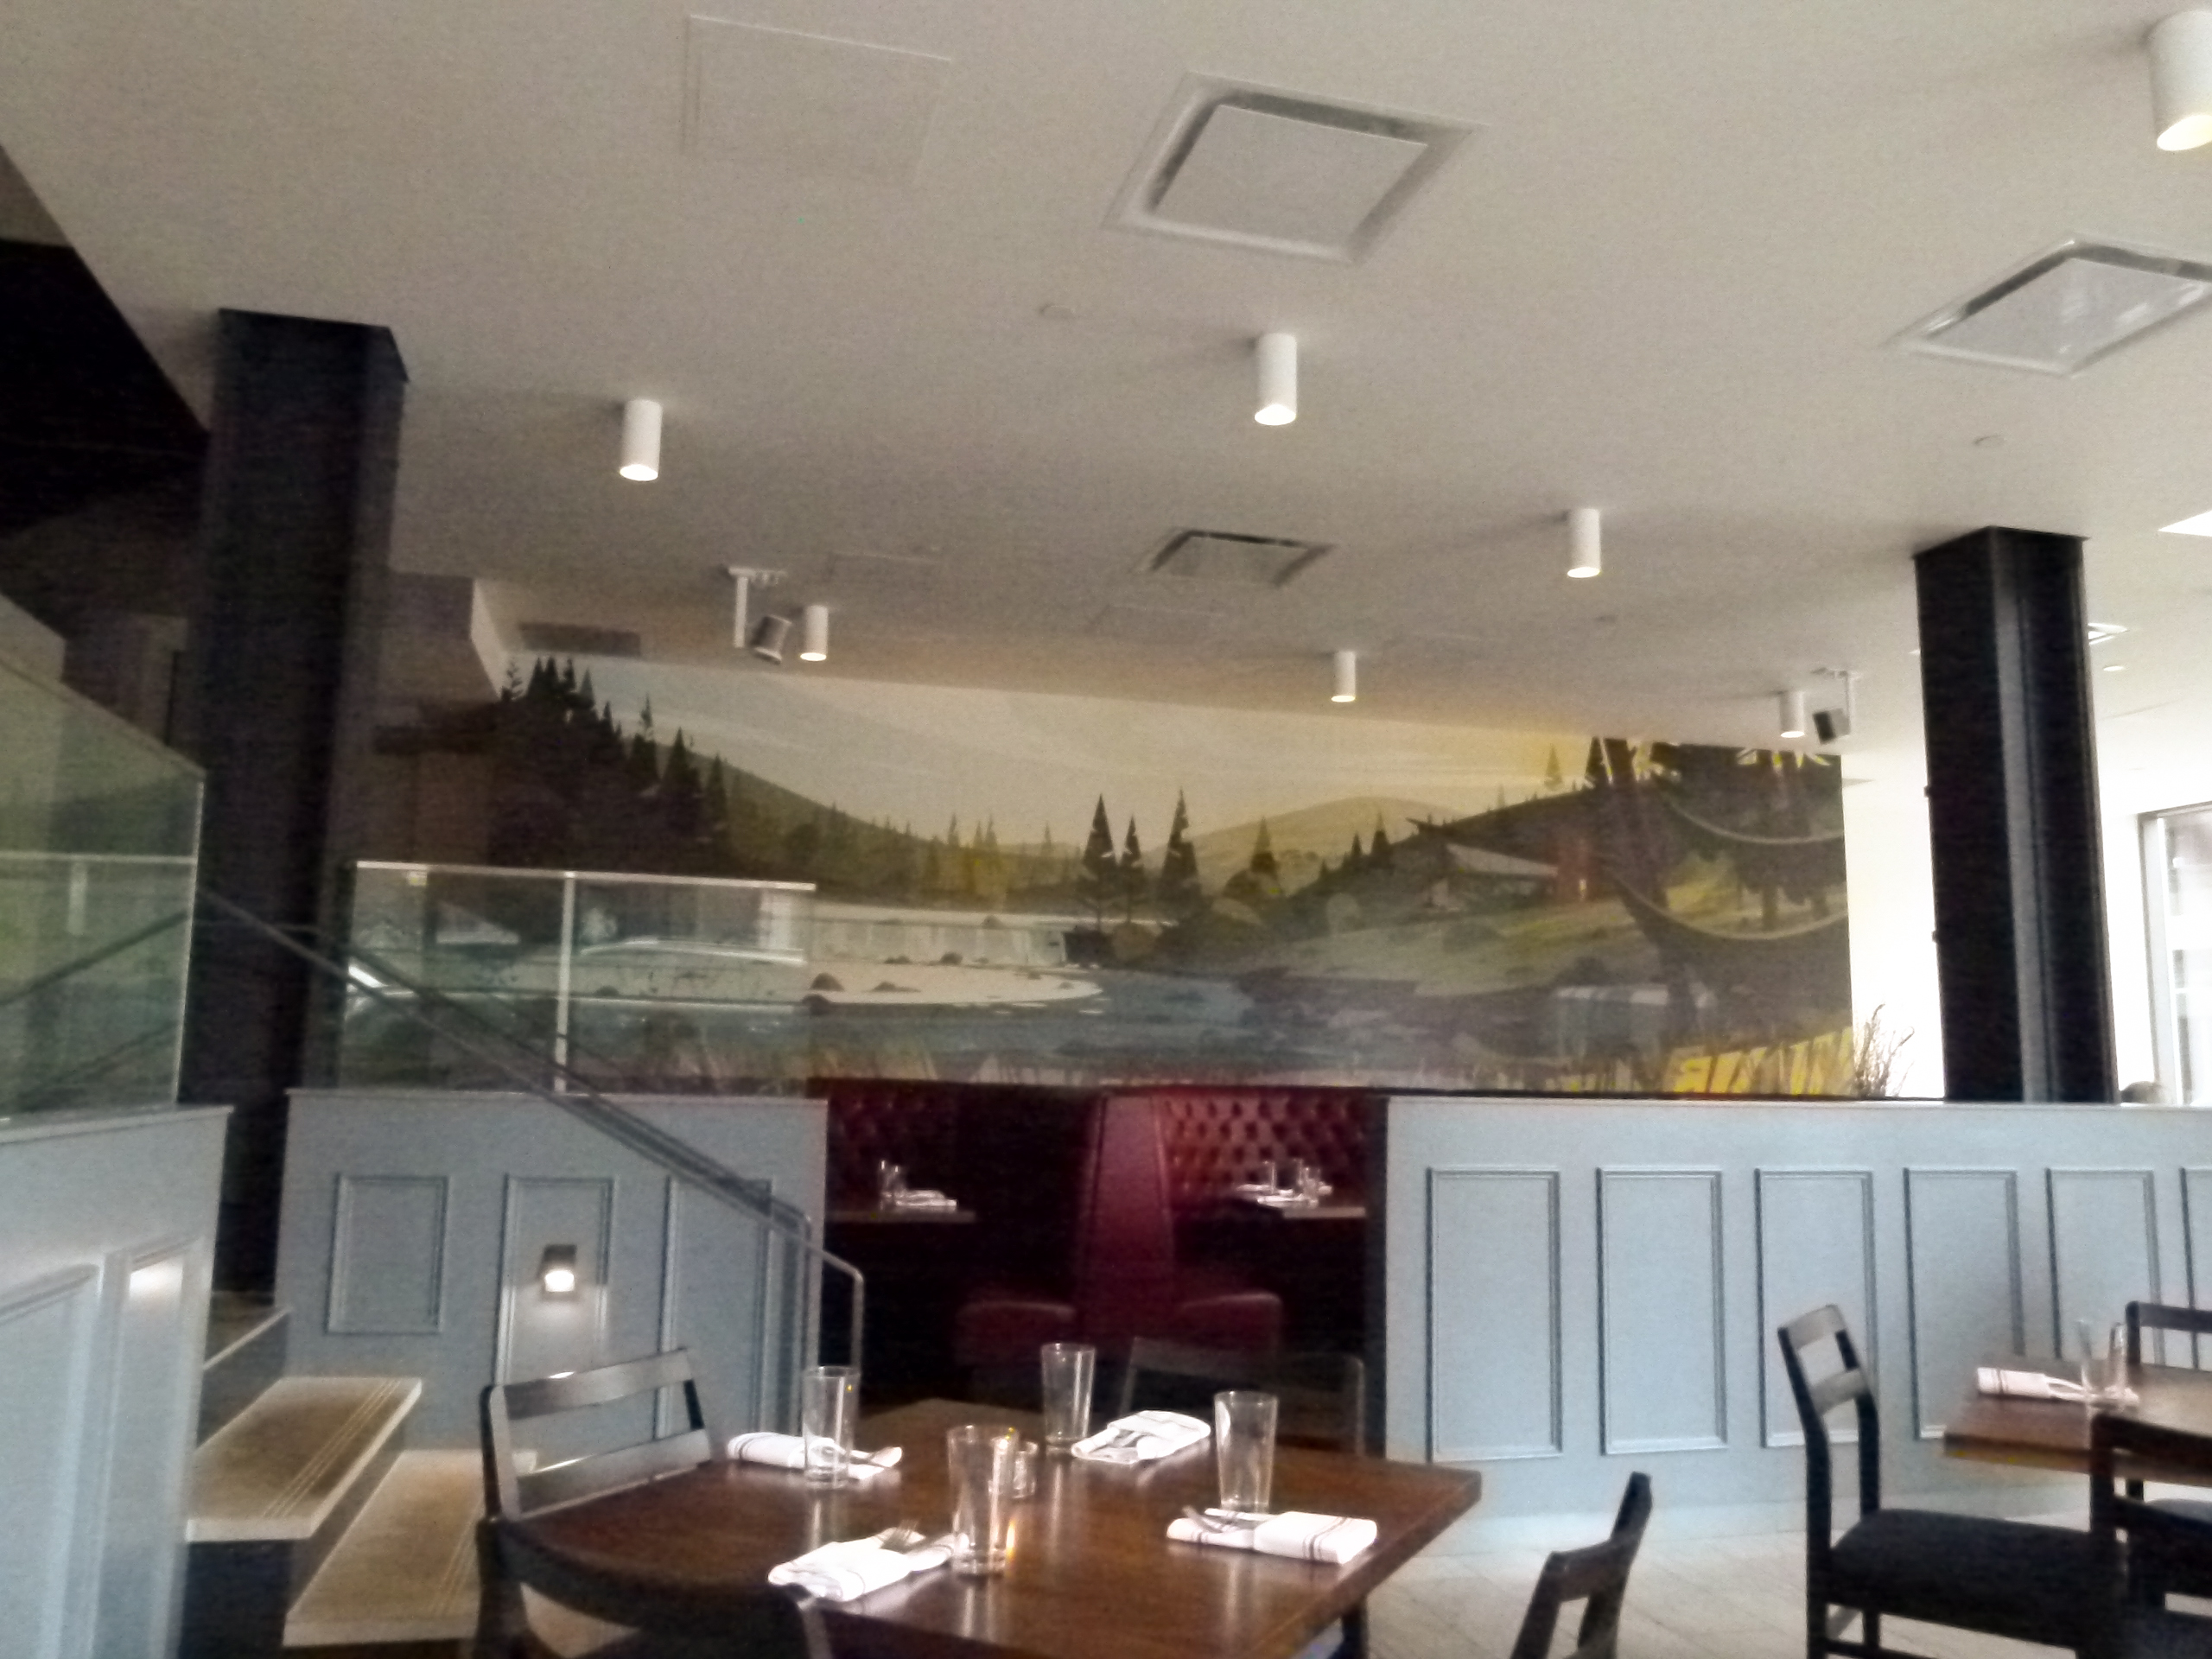 The main dining area of Union Standard before opening for lunch.